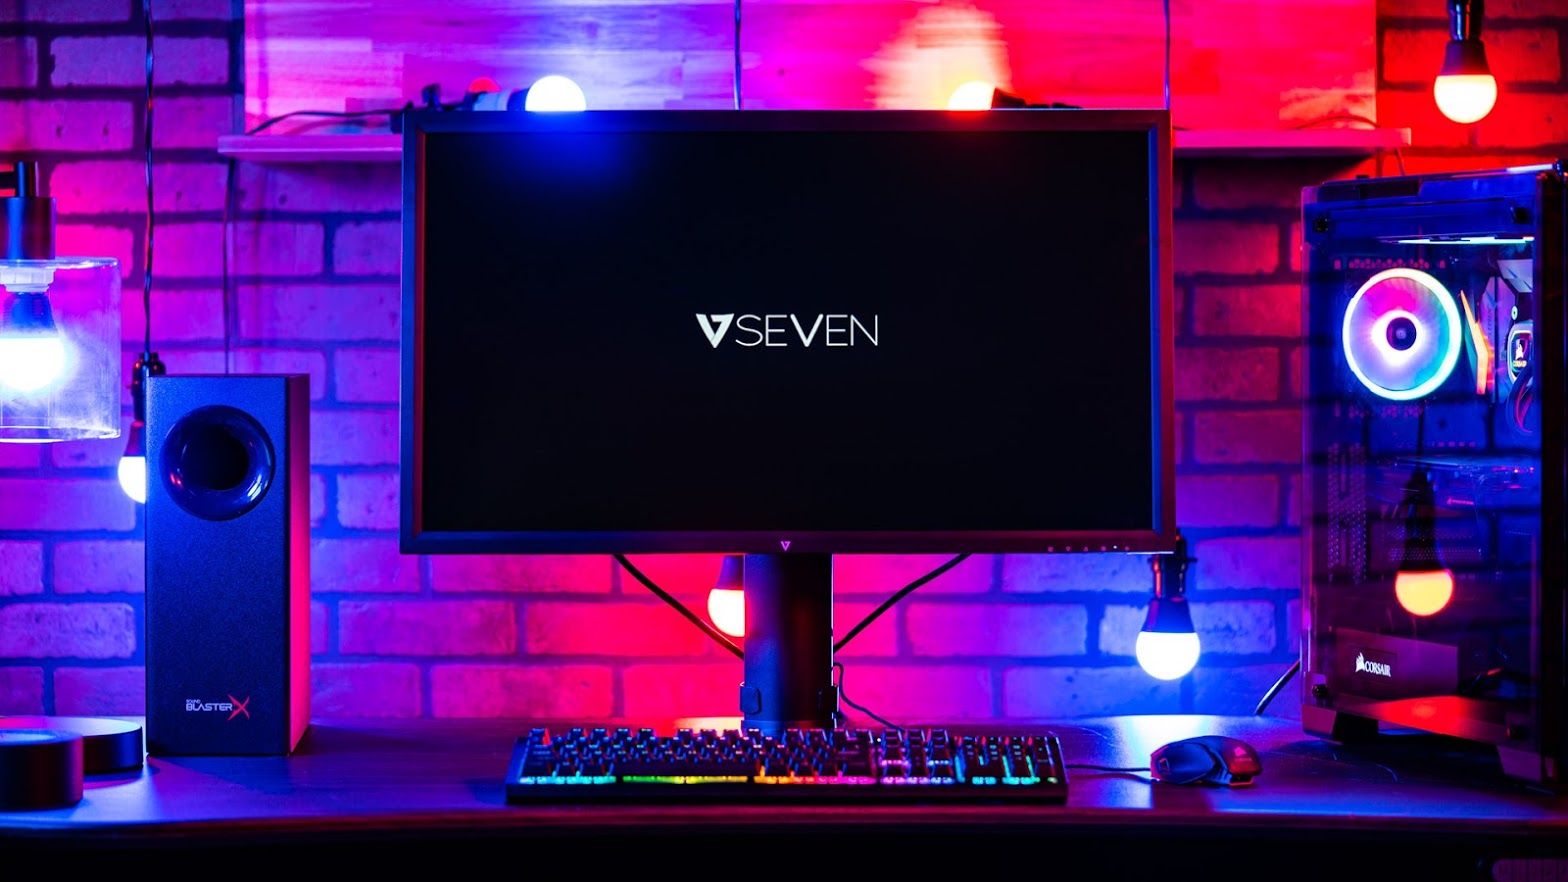 Seven Ultra HD 4K Monitor facing forward on a desk next to a gaming rig, all set in RGB-lit lighting